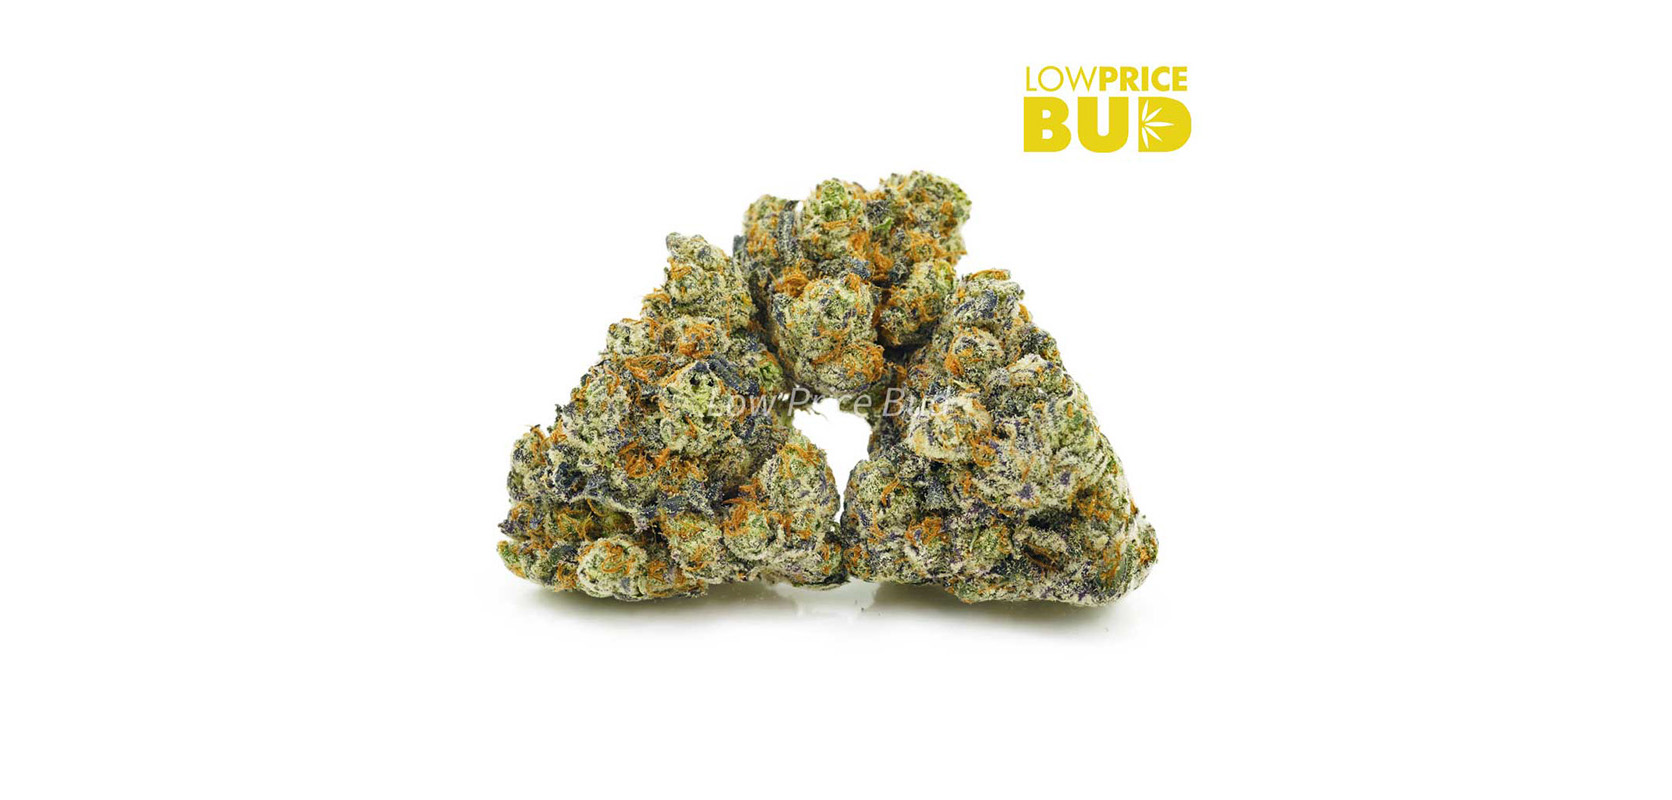 Buy cannabis canada Purple Pug’s Breath Craft Cannabis from low price bud online dispensary in Canada.